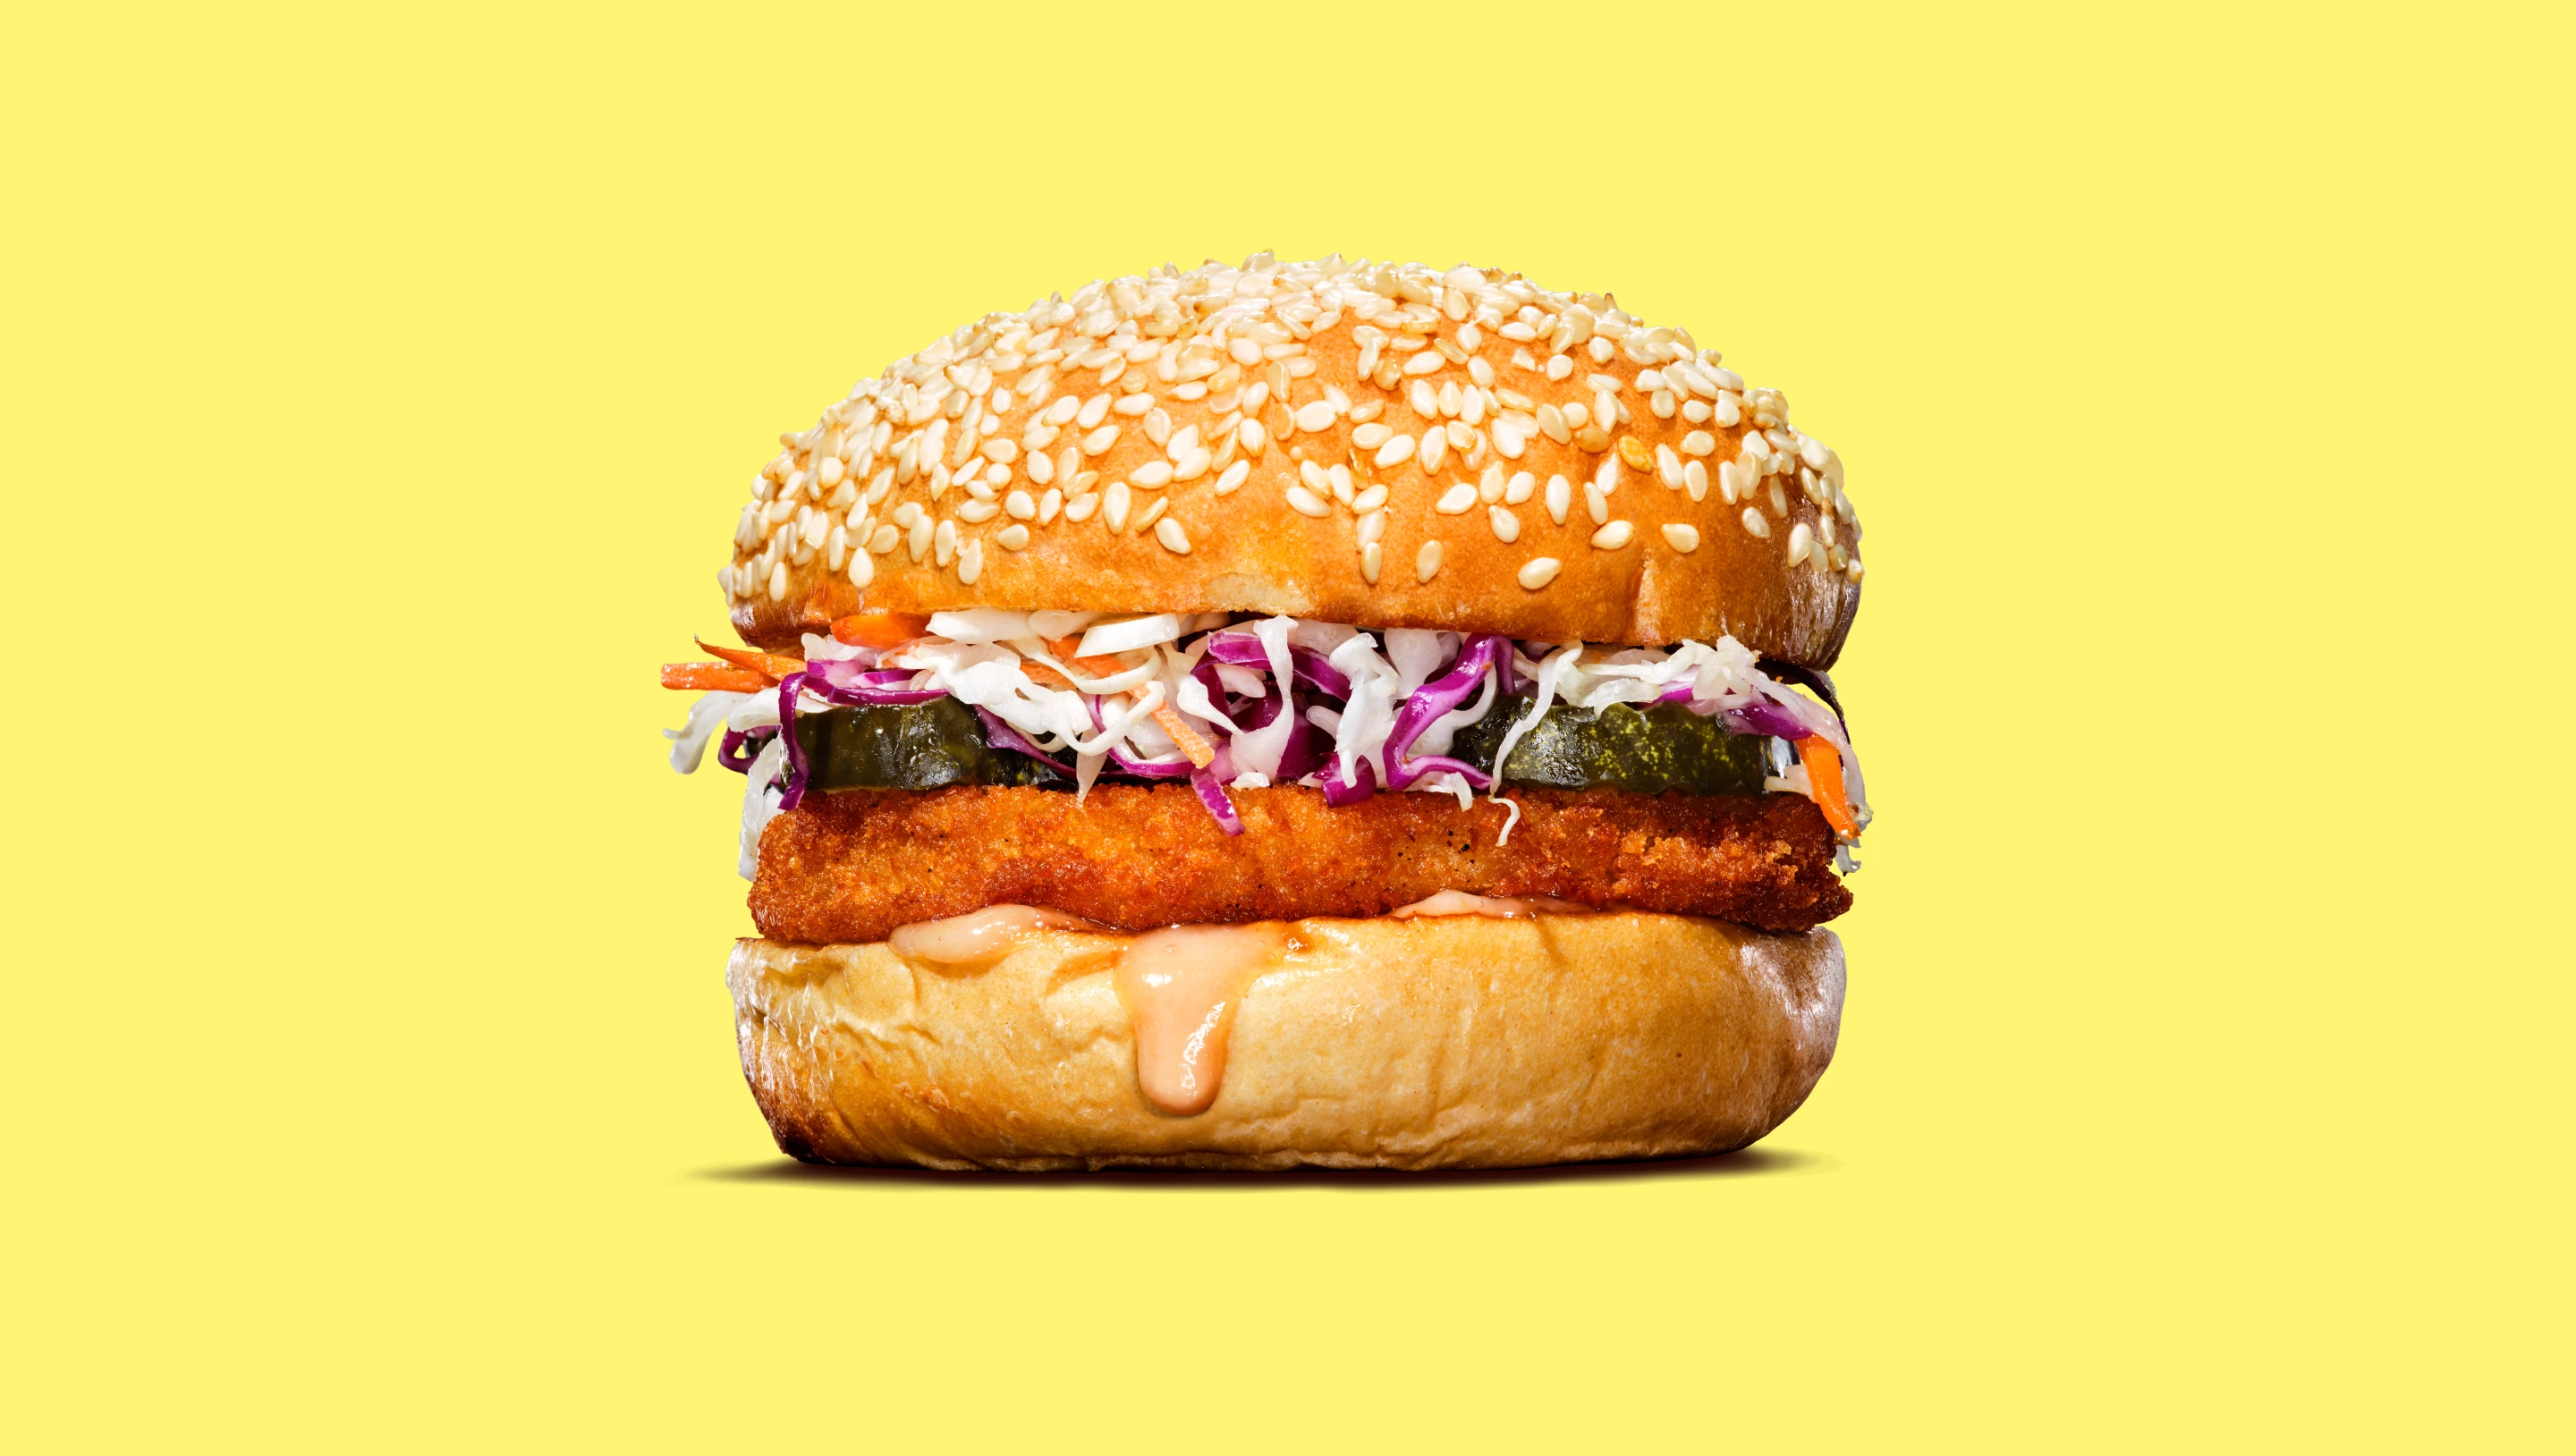 Impossible spicy chicken patty in a sandwich with slaw, pickles and a sesame bun on a yellow background